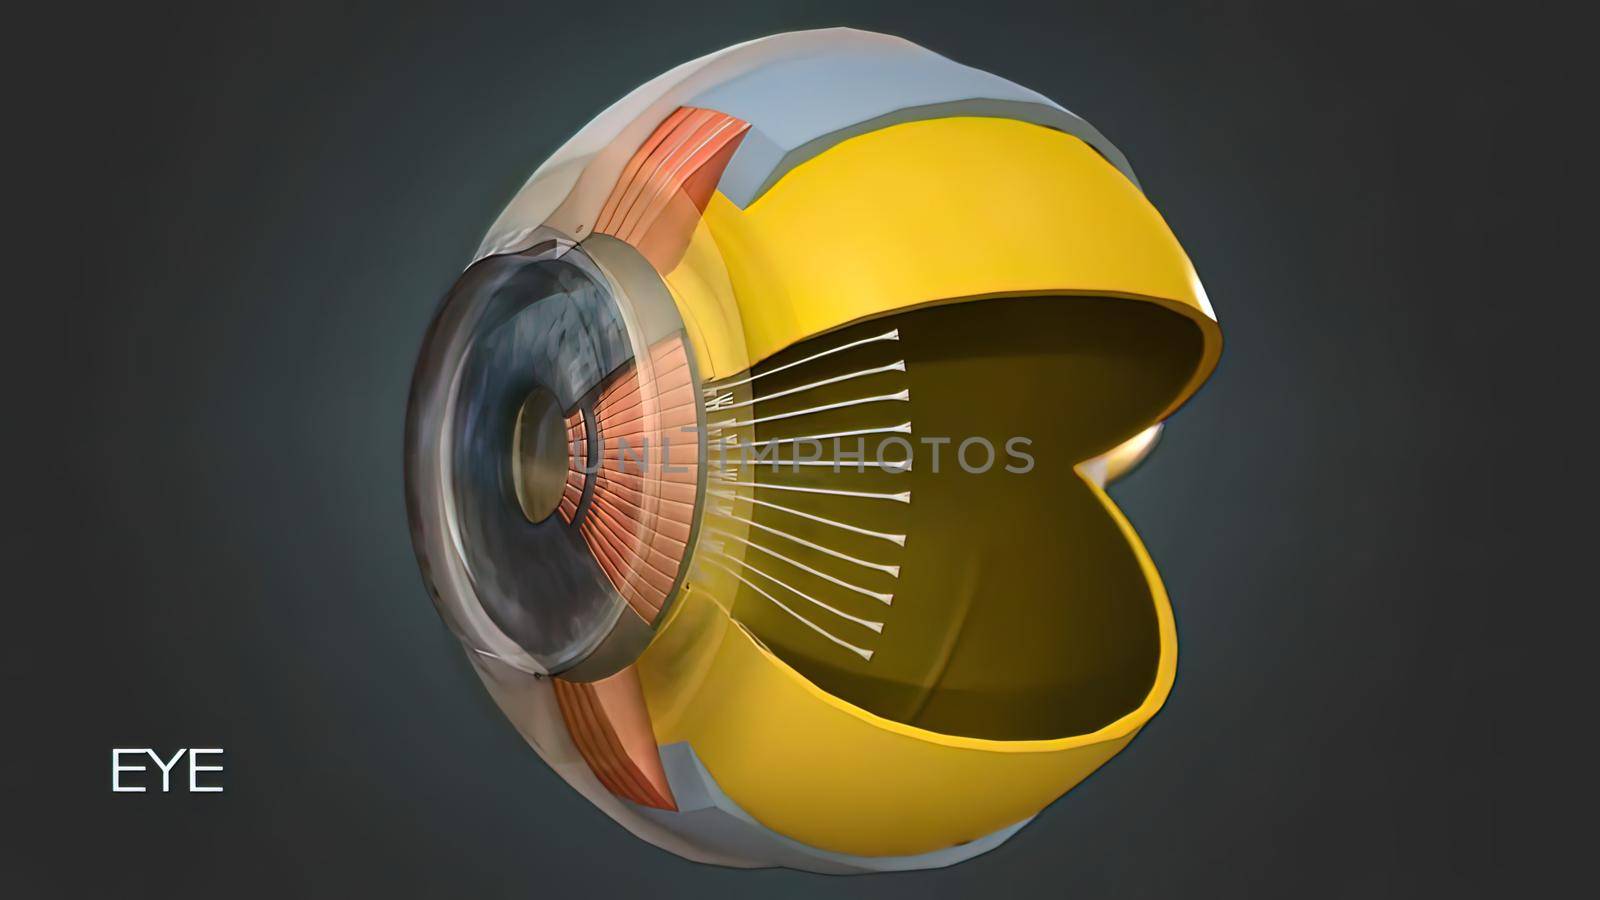 Eye Anatomy - Internal Structure, Medically Accurate by creativepic